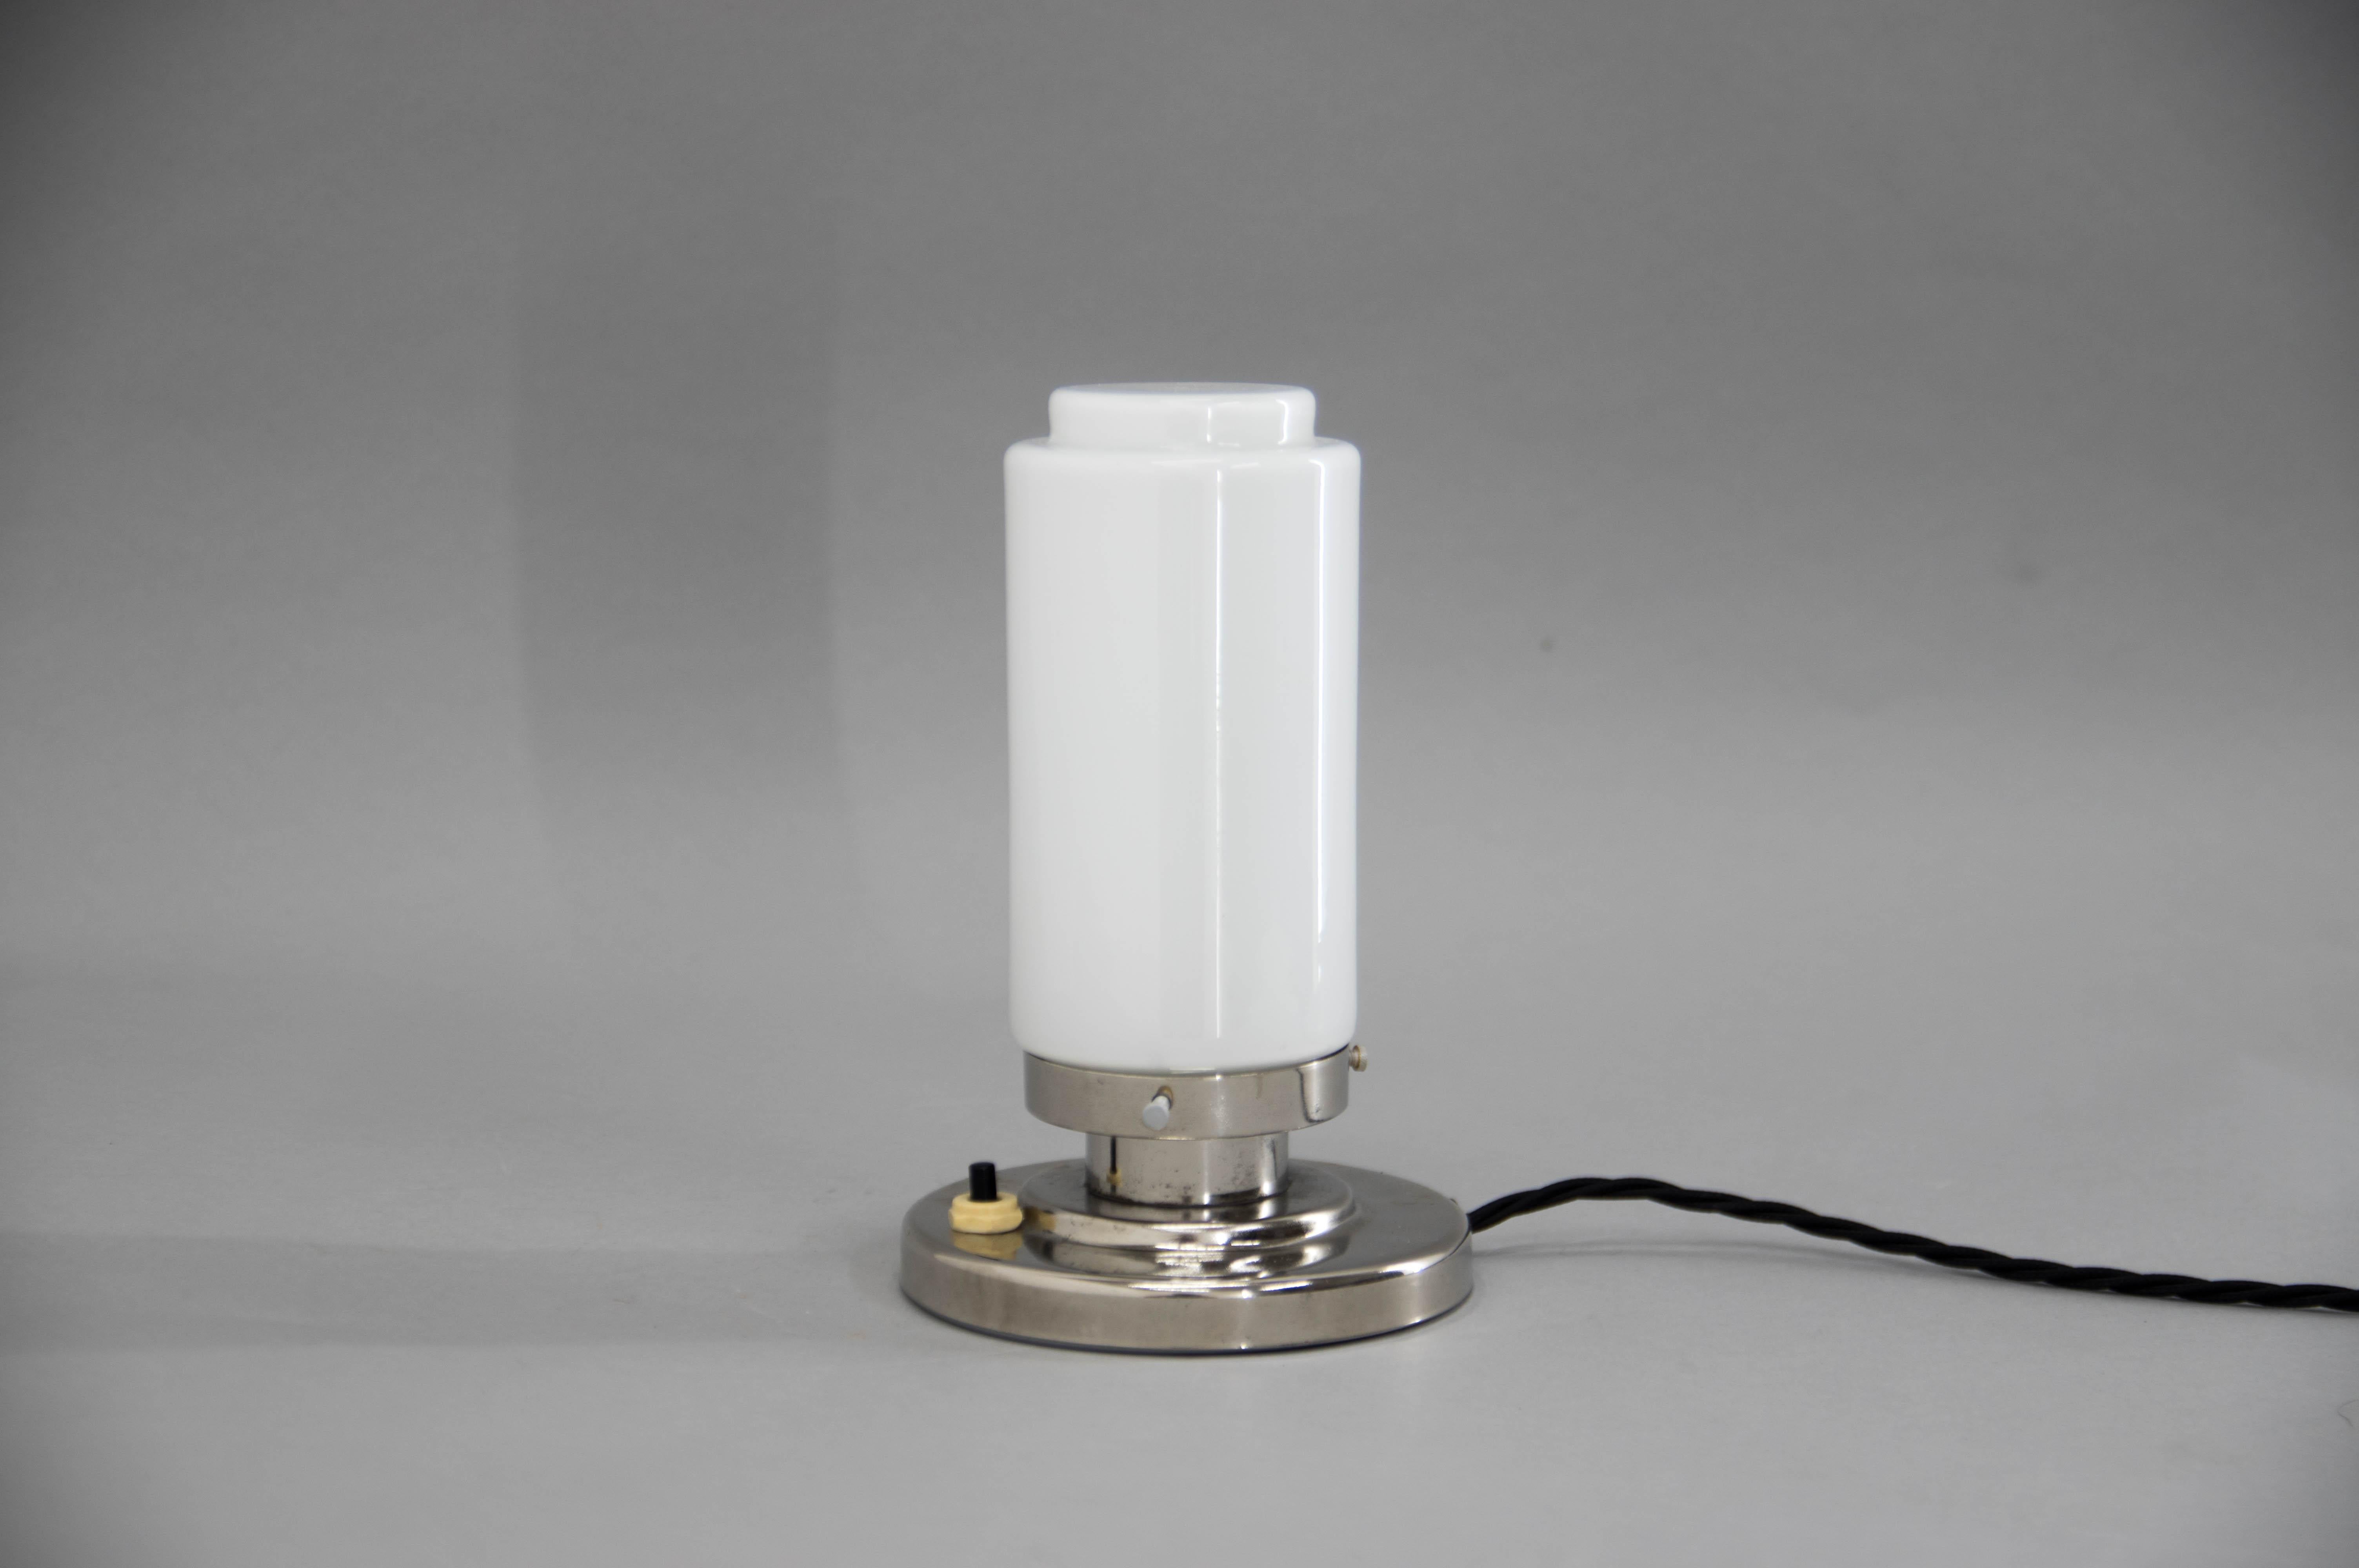 Restored: nickel polished, rewired
Glass with small dent at a base, see photo, no effect on function, not visible when mounted.
1x40W, E25-E27 bulb
US plug adapter included.